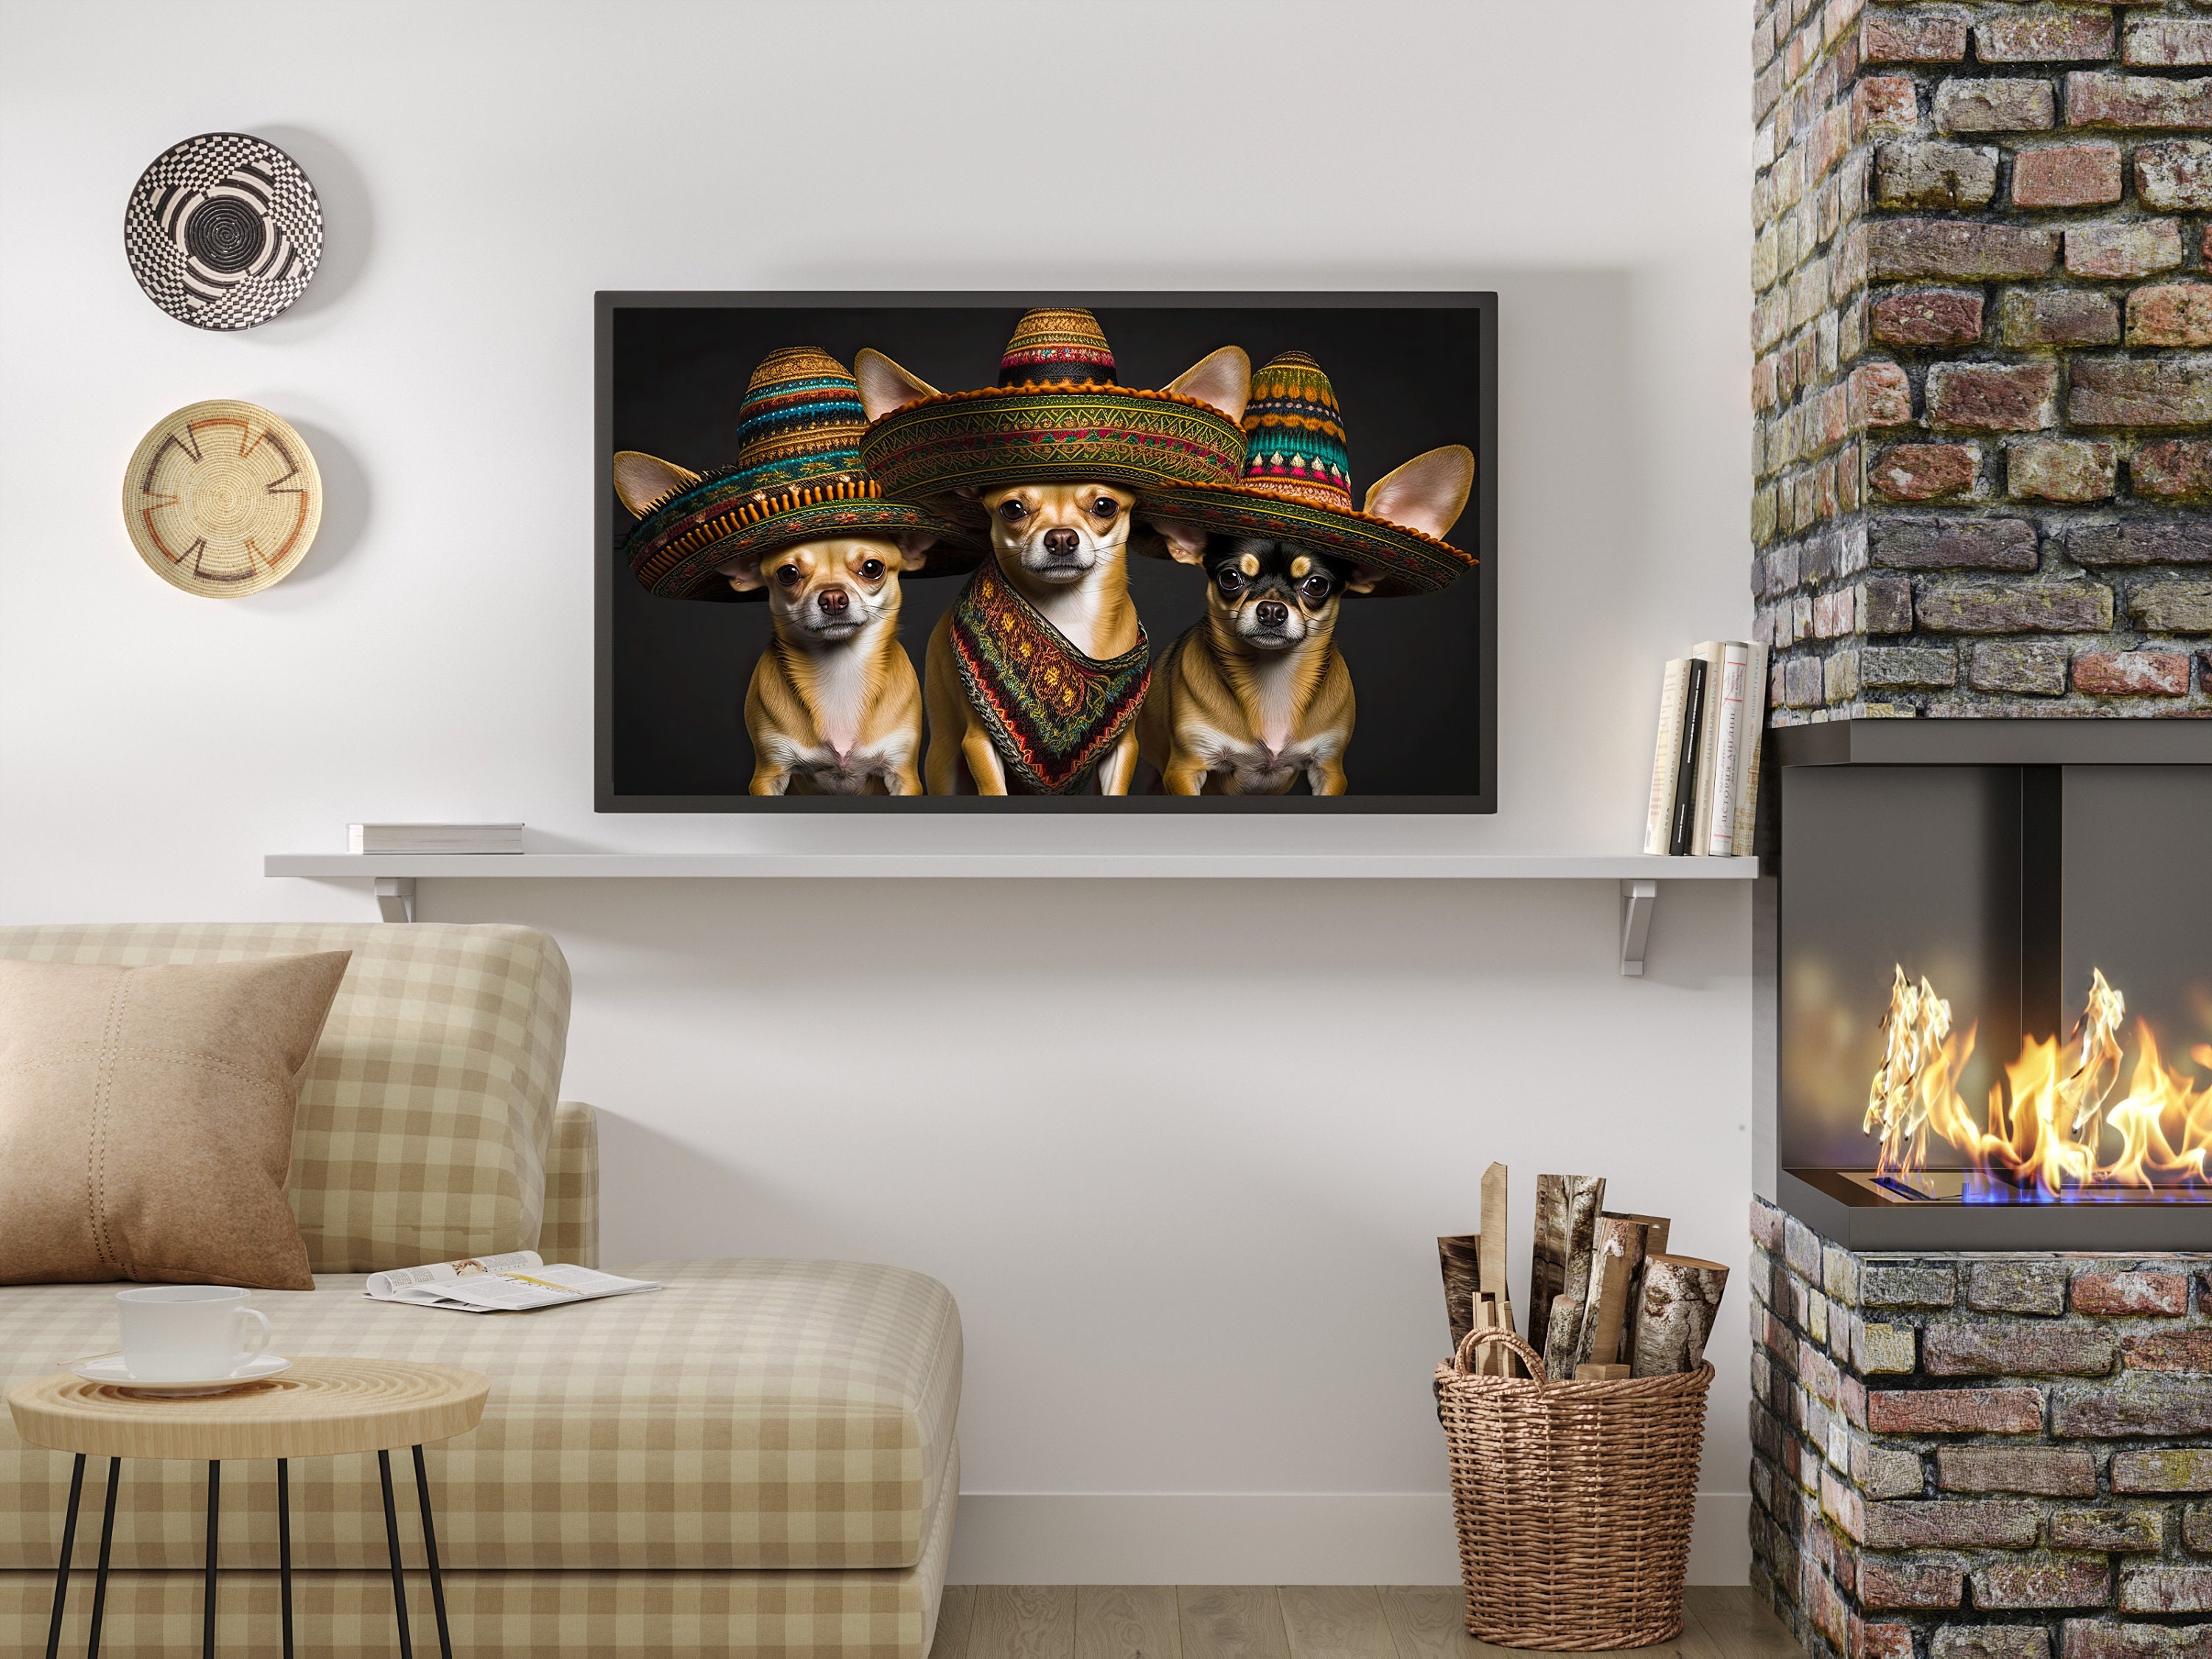 Mexican Chihuahua Standing on Top of A Straw Sombrero Tiny Small Dog Big Hat | Large Stretched Canvas, Black Floating Frame Wall Art Print | Great